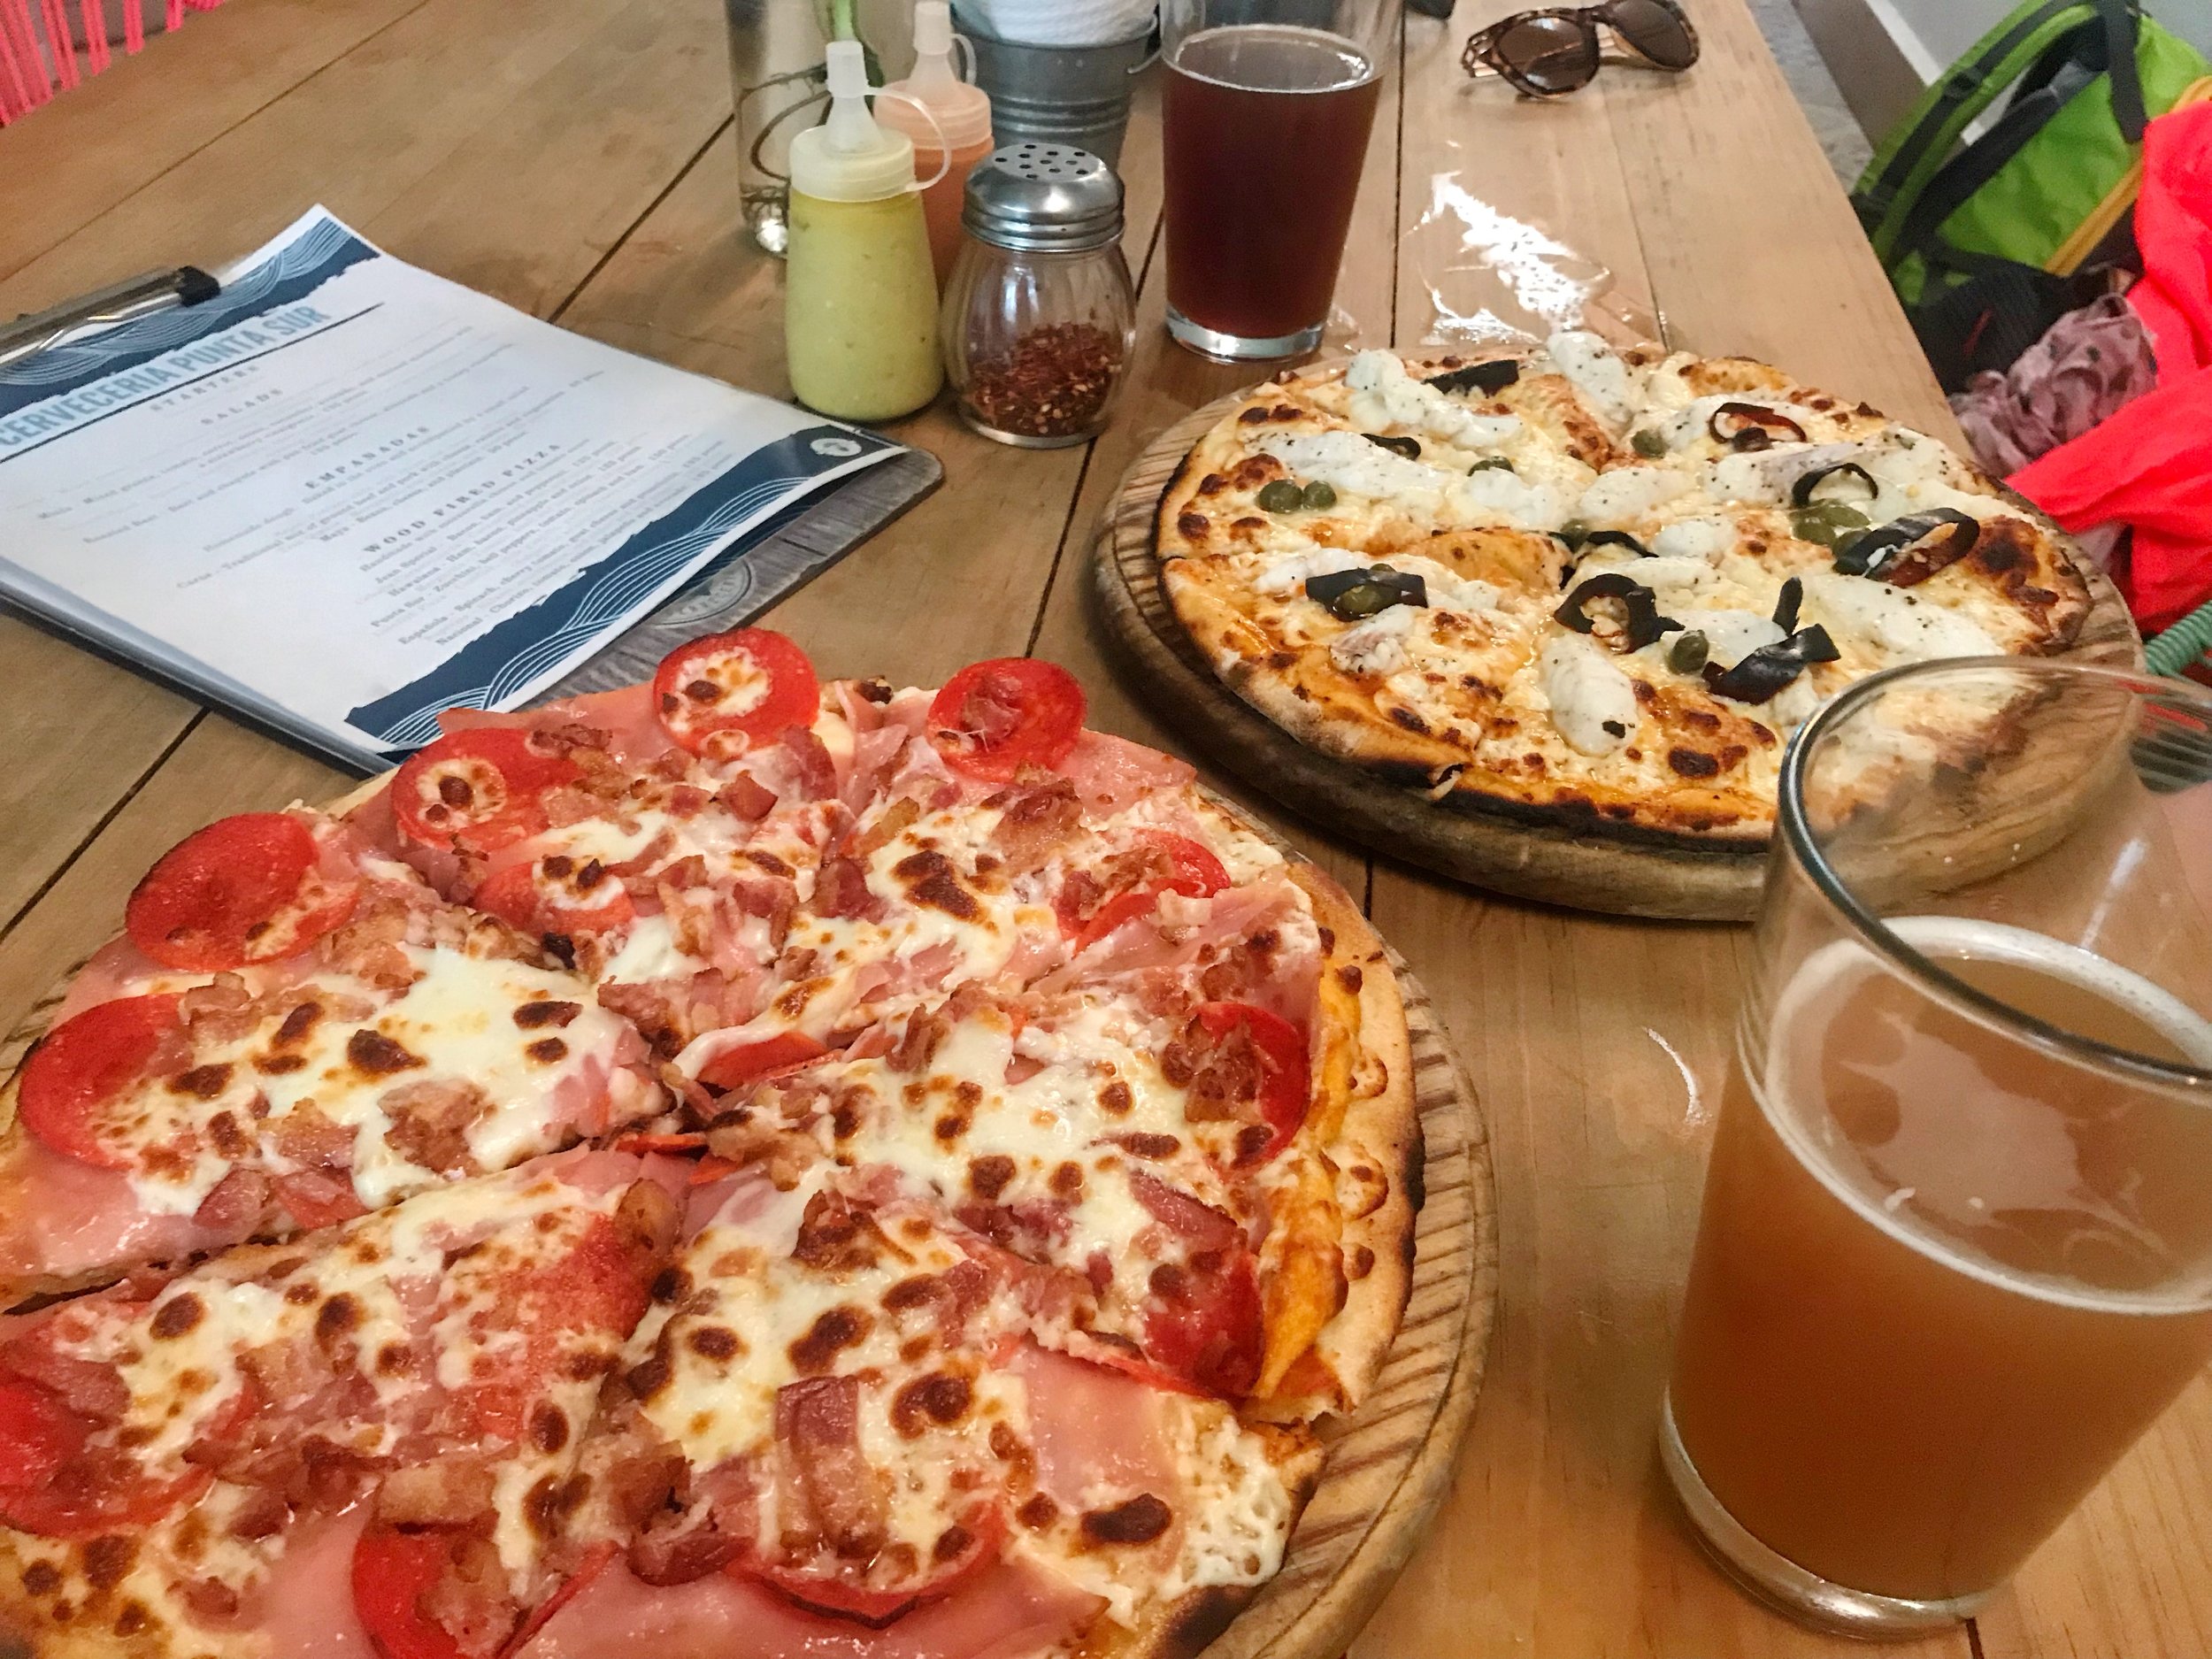  things to do in Cozumel - micro brewery cozumel pizza 